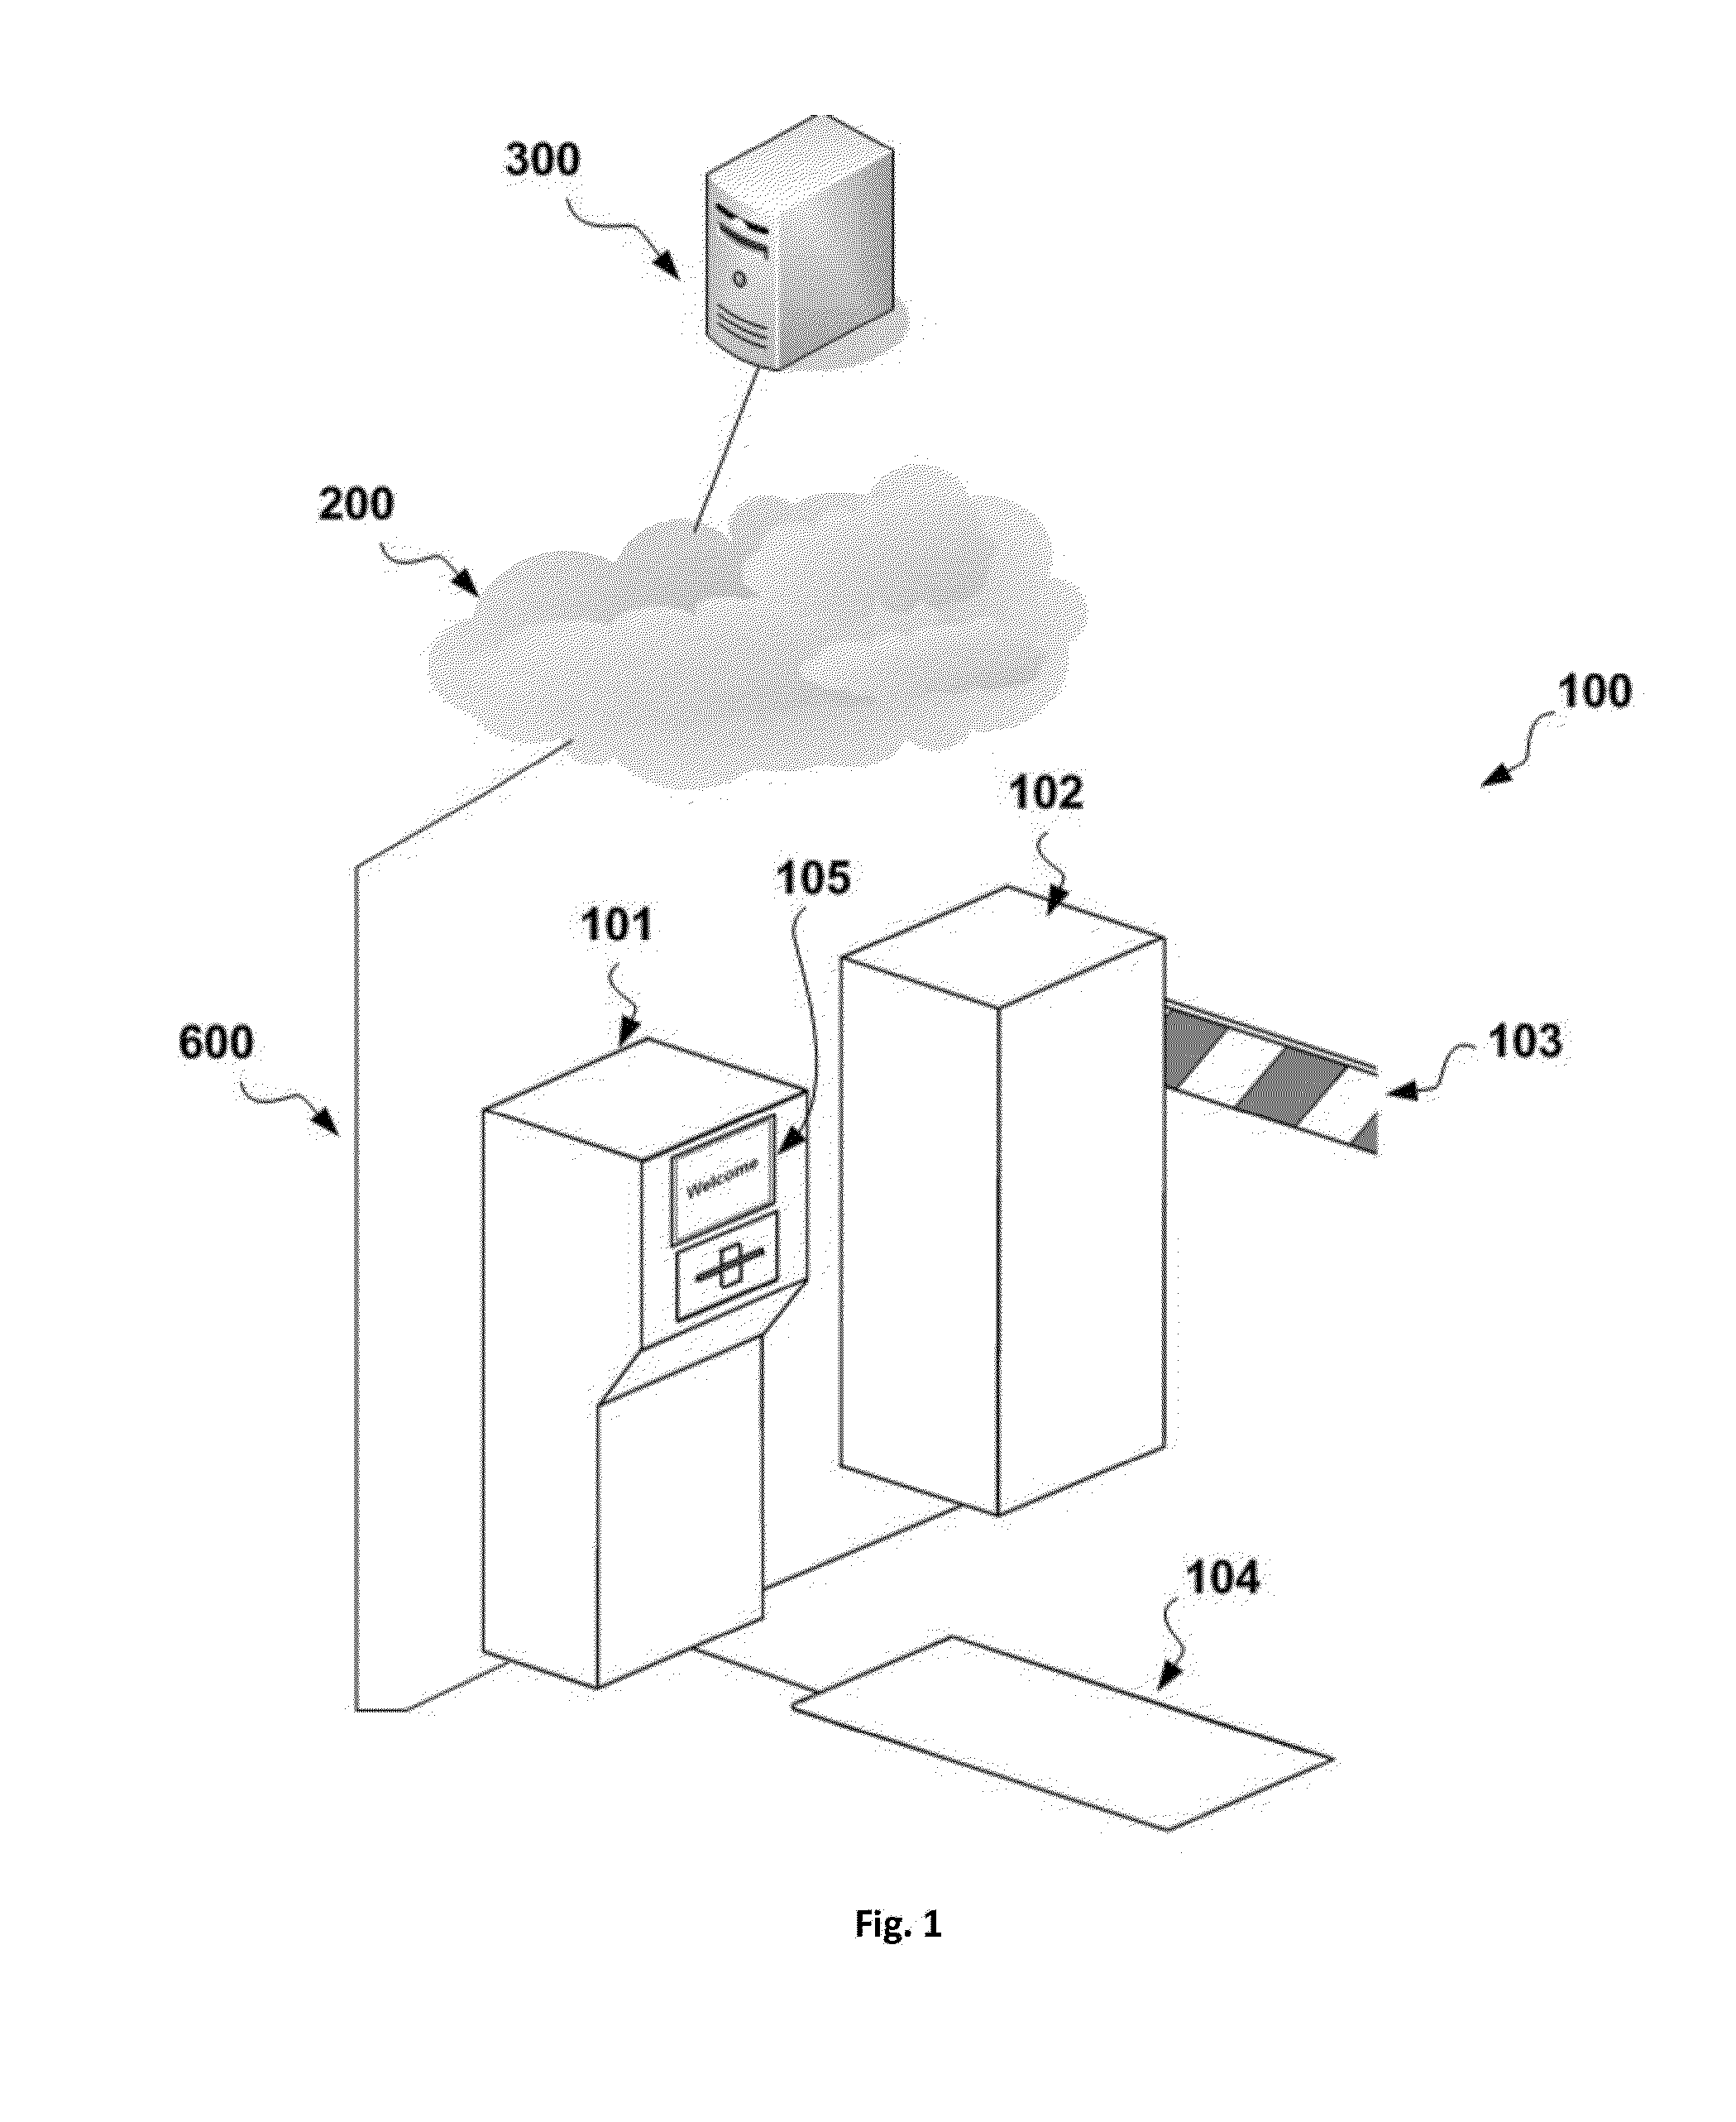 Method for the capturing and payment of parking transactions